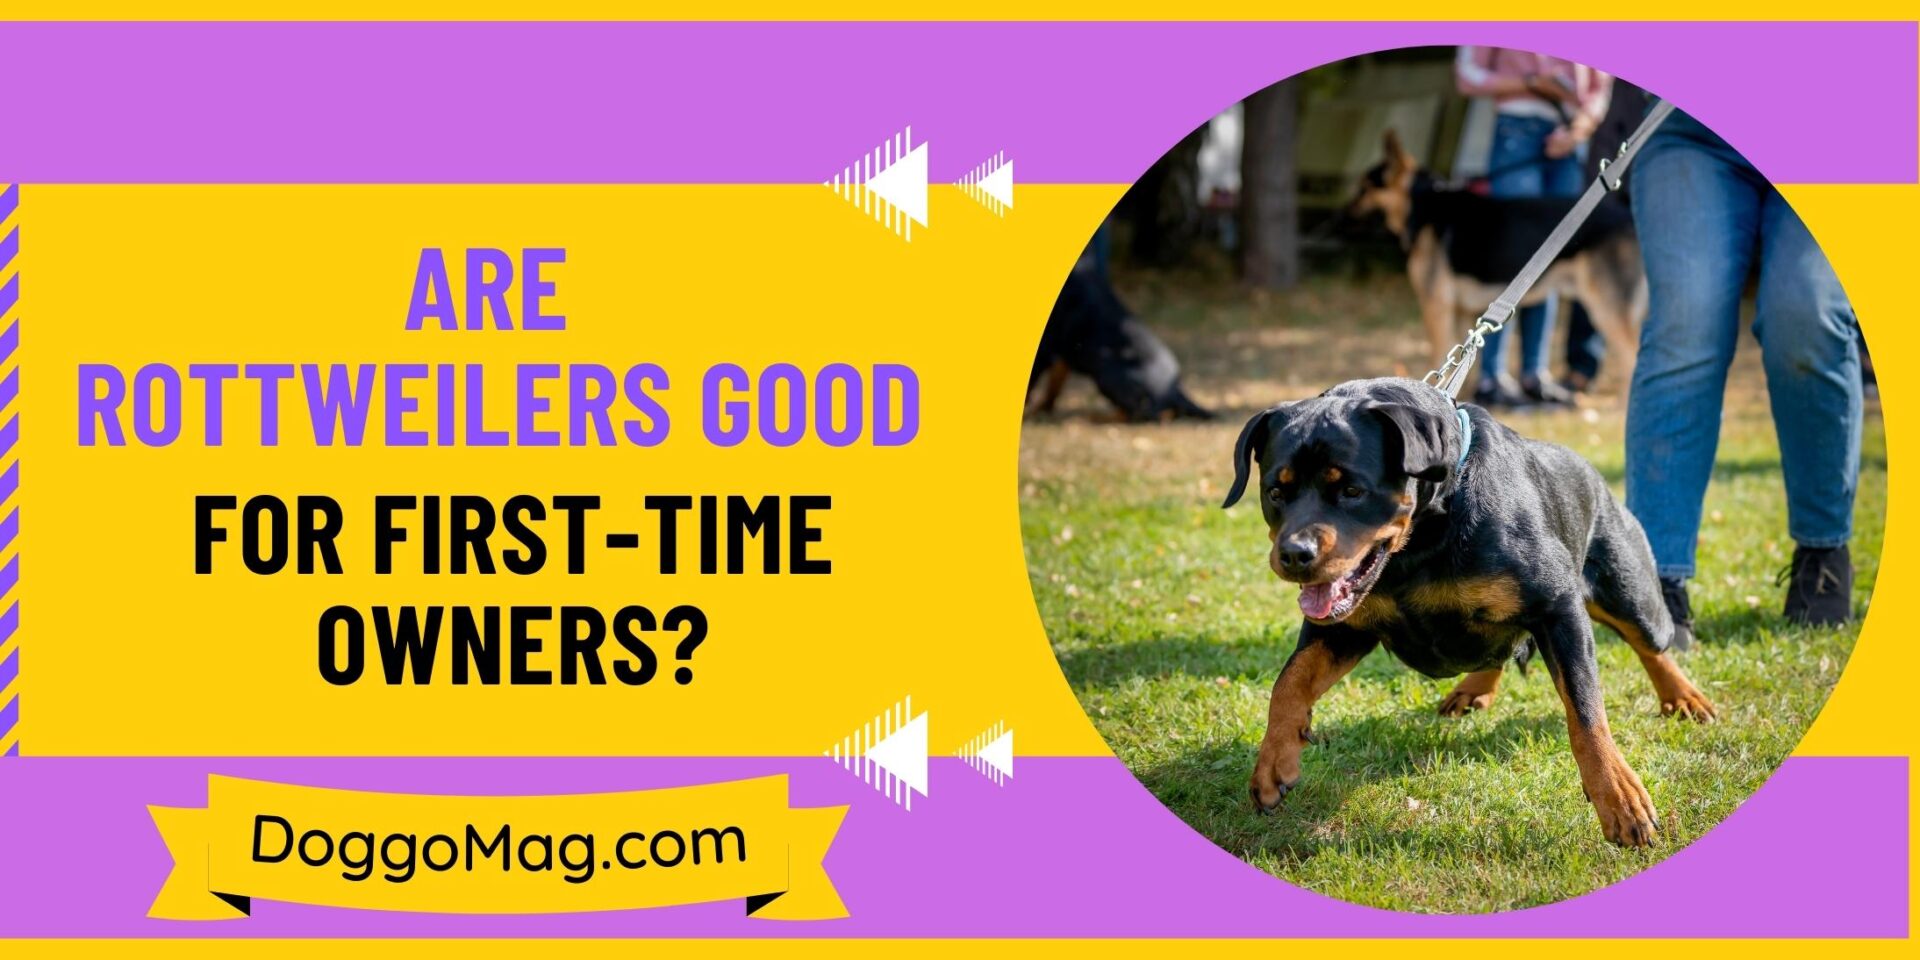 Are Rottweilers Good For First-Time Owners